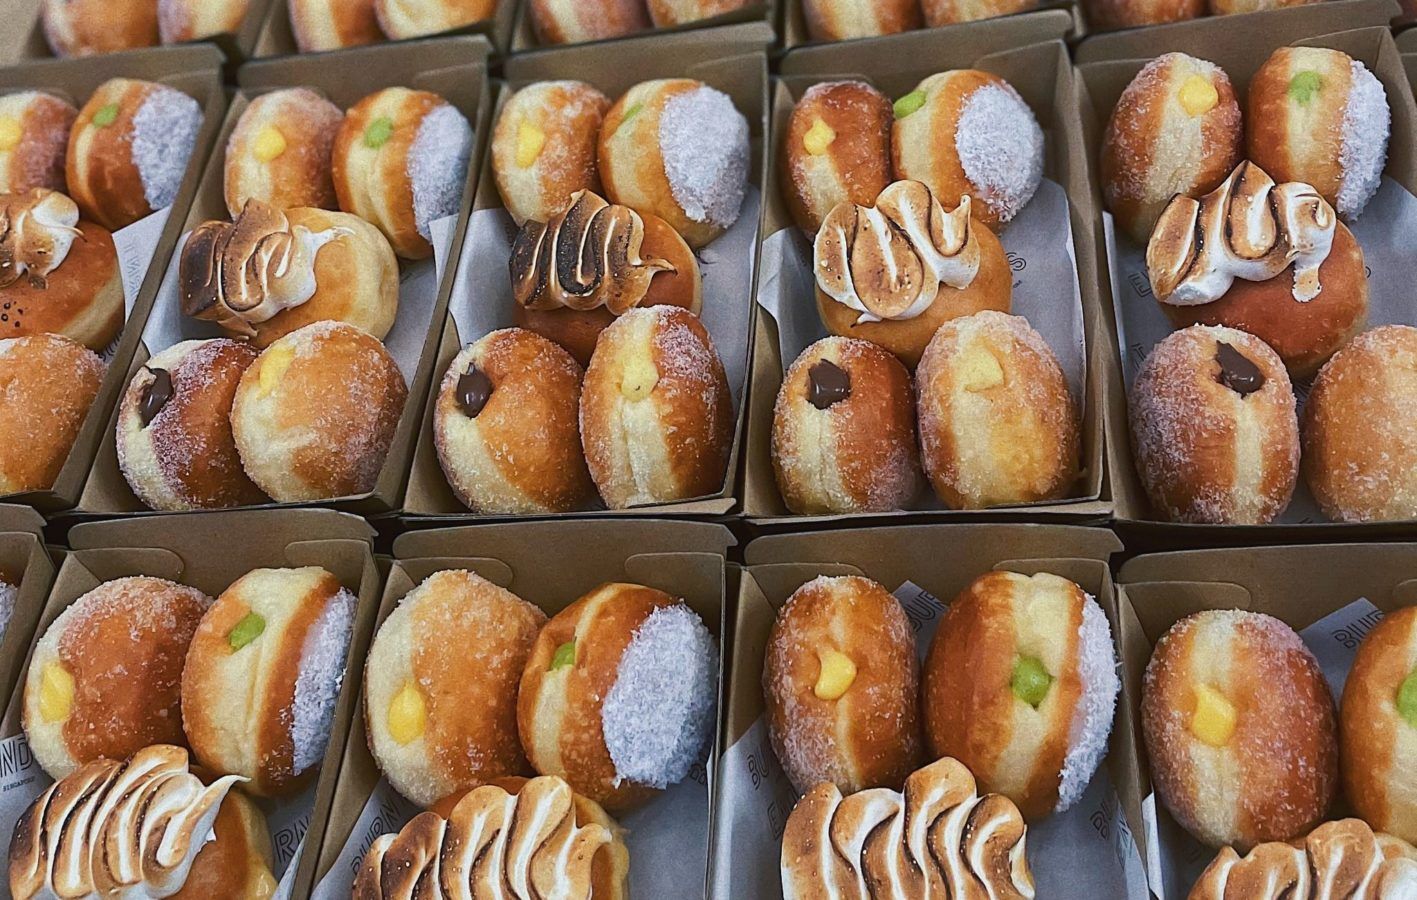 10 bakeries for the best stuffed donuts and bombolonis in Singapore